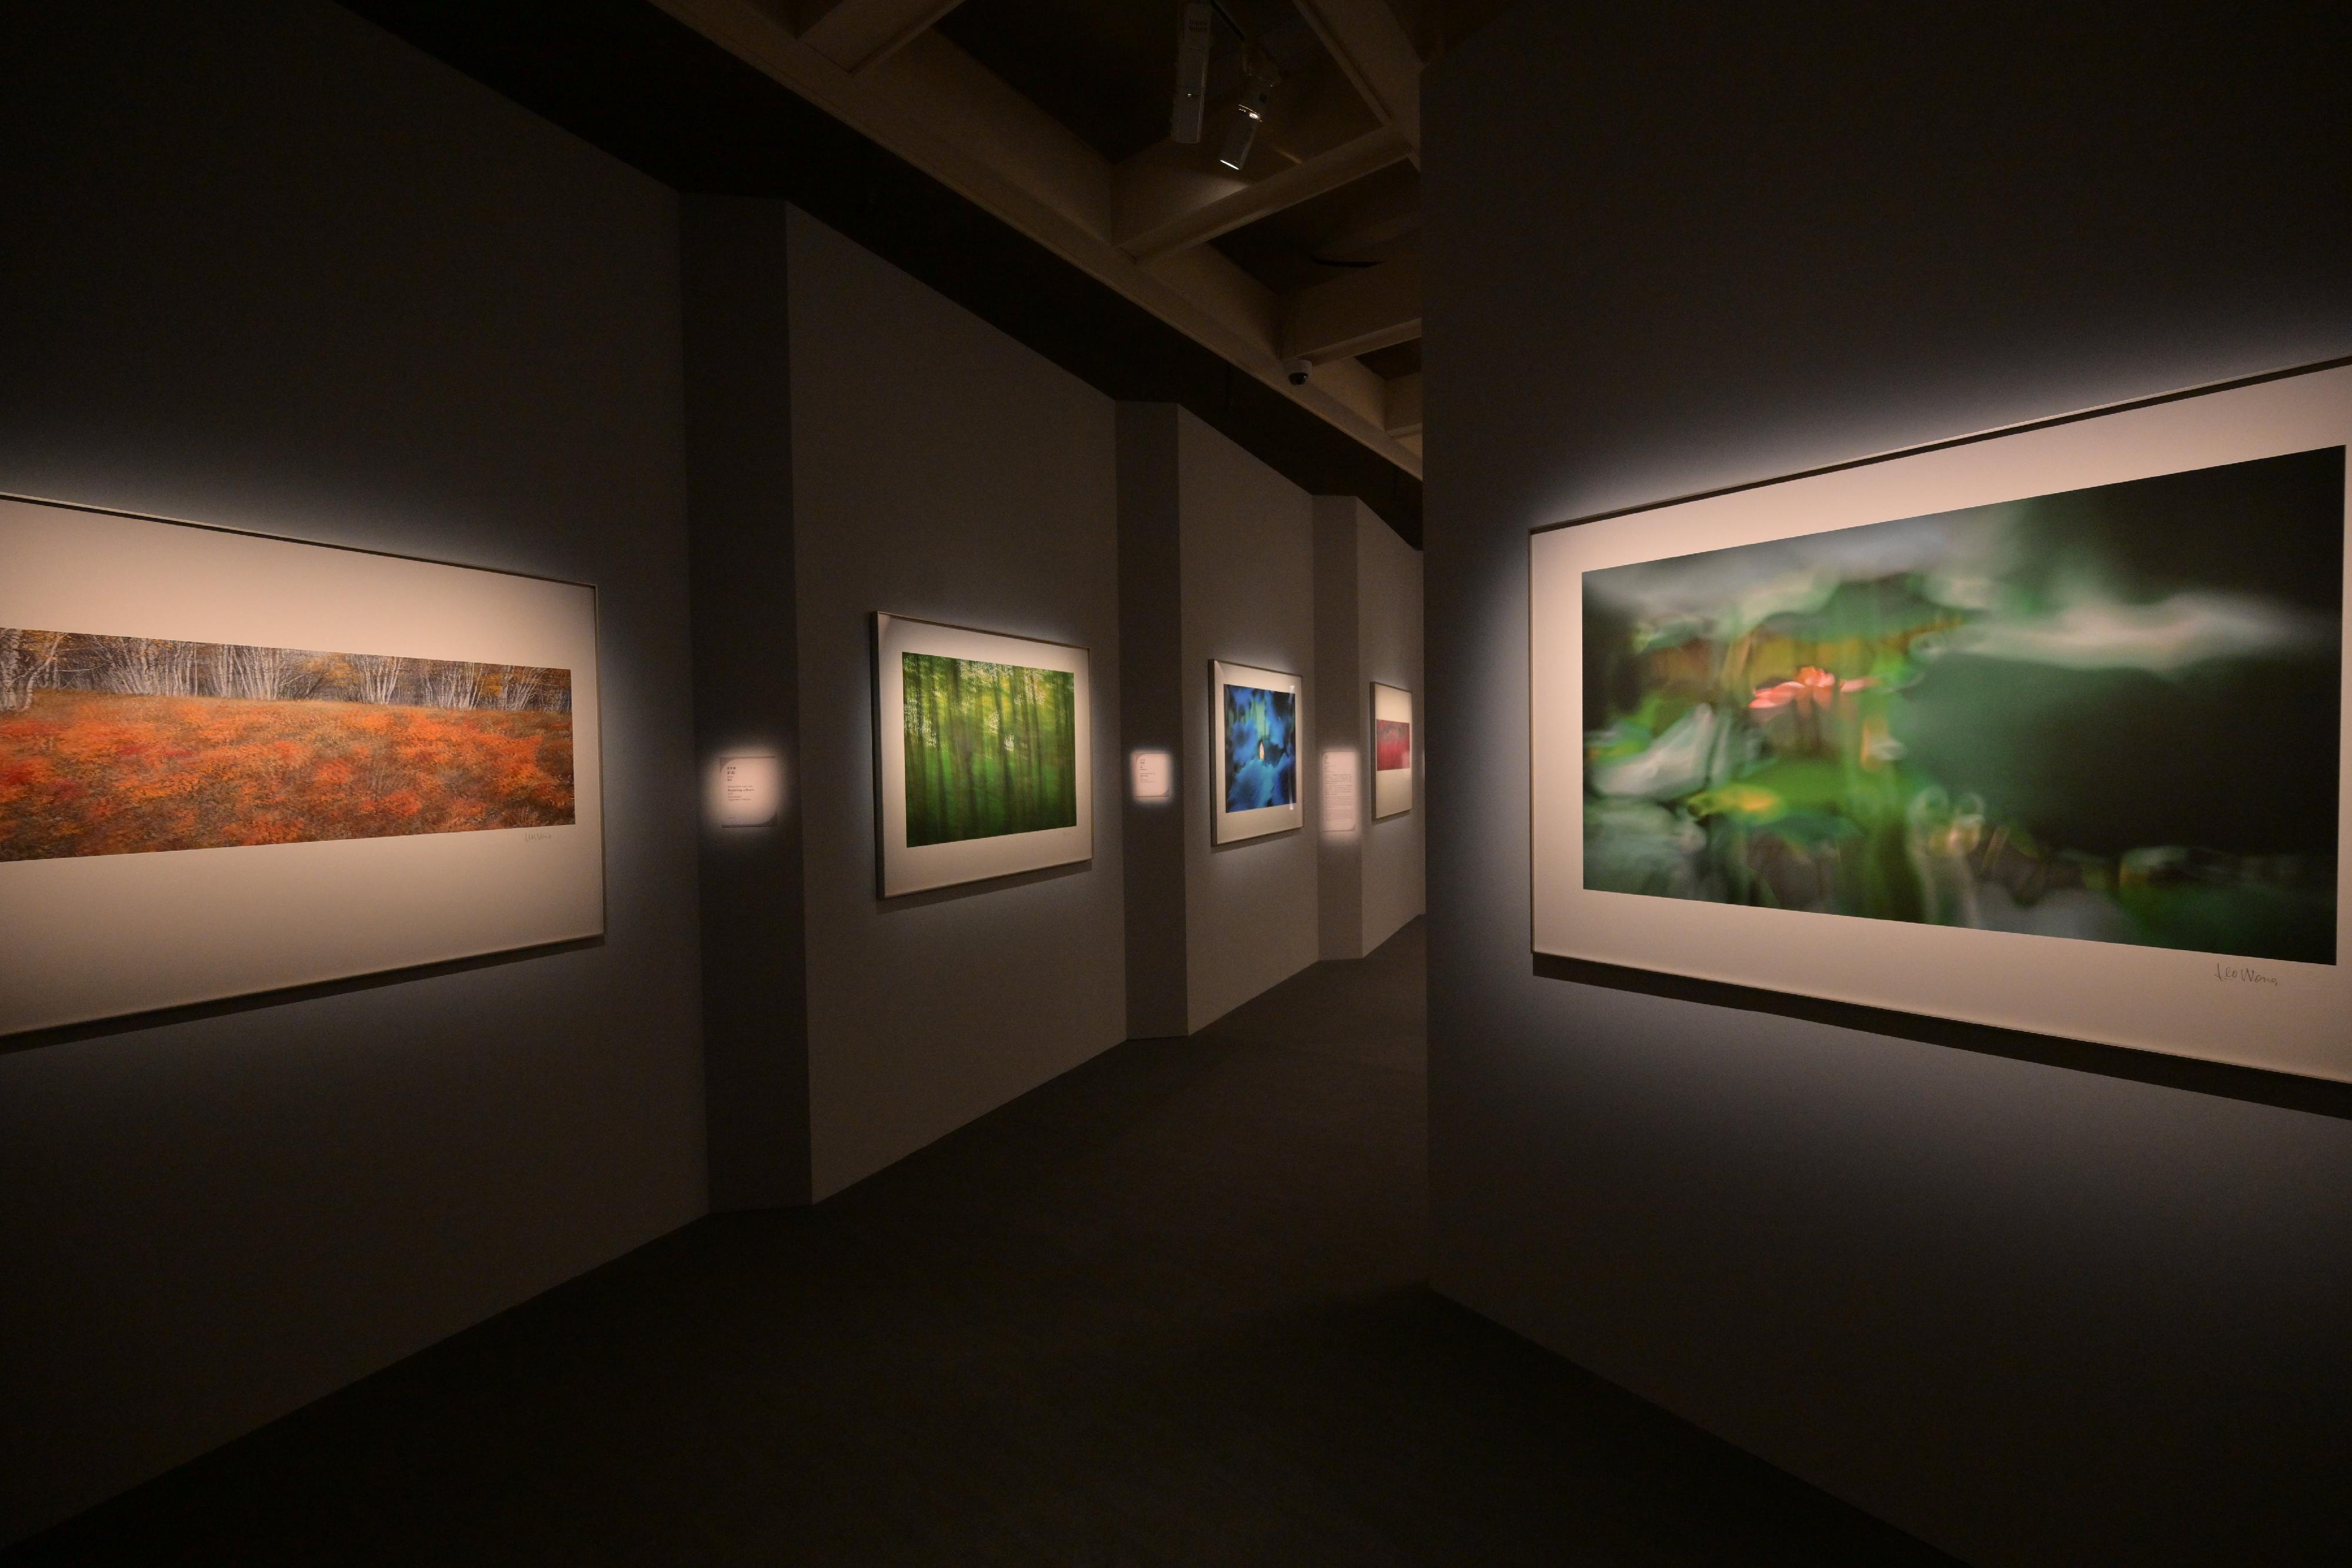 The Wu Guanzhong Art Sponsorship: Dialogue with 20th Century Chinese Art Series opened today (March 21) at the Hong Kong Museum of Art. Picture shows photographic works by renowned collector and photographer Dr Leo Wong in the "True Likeness: The Art and Collection of Jingguanlou" exhibition.